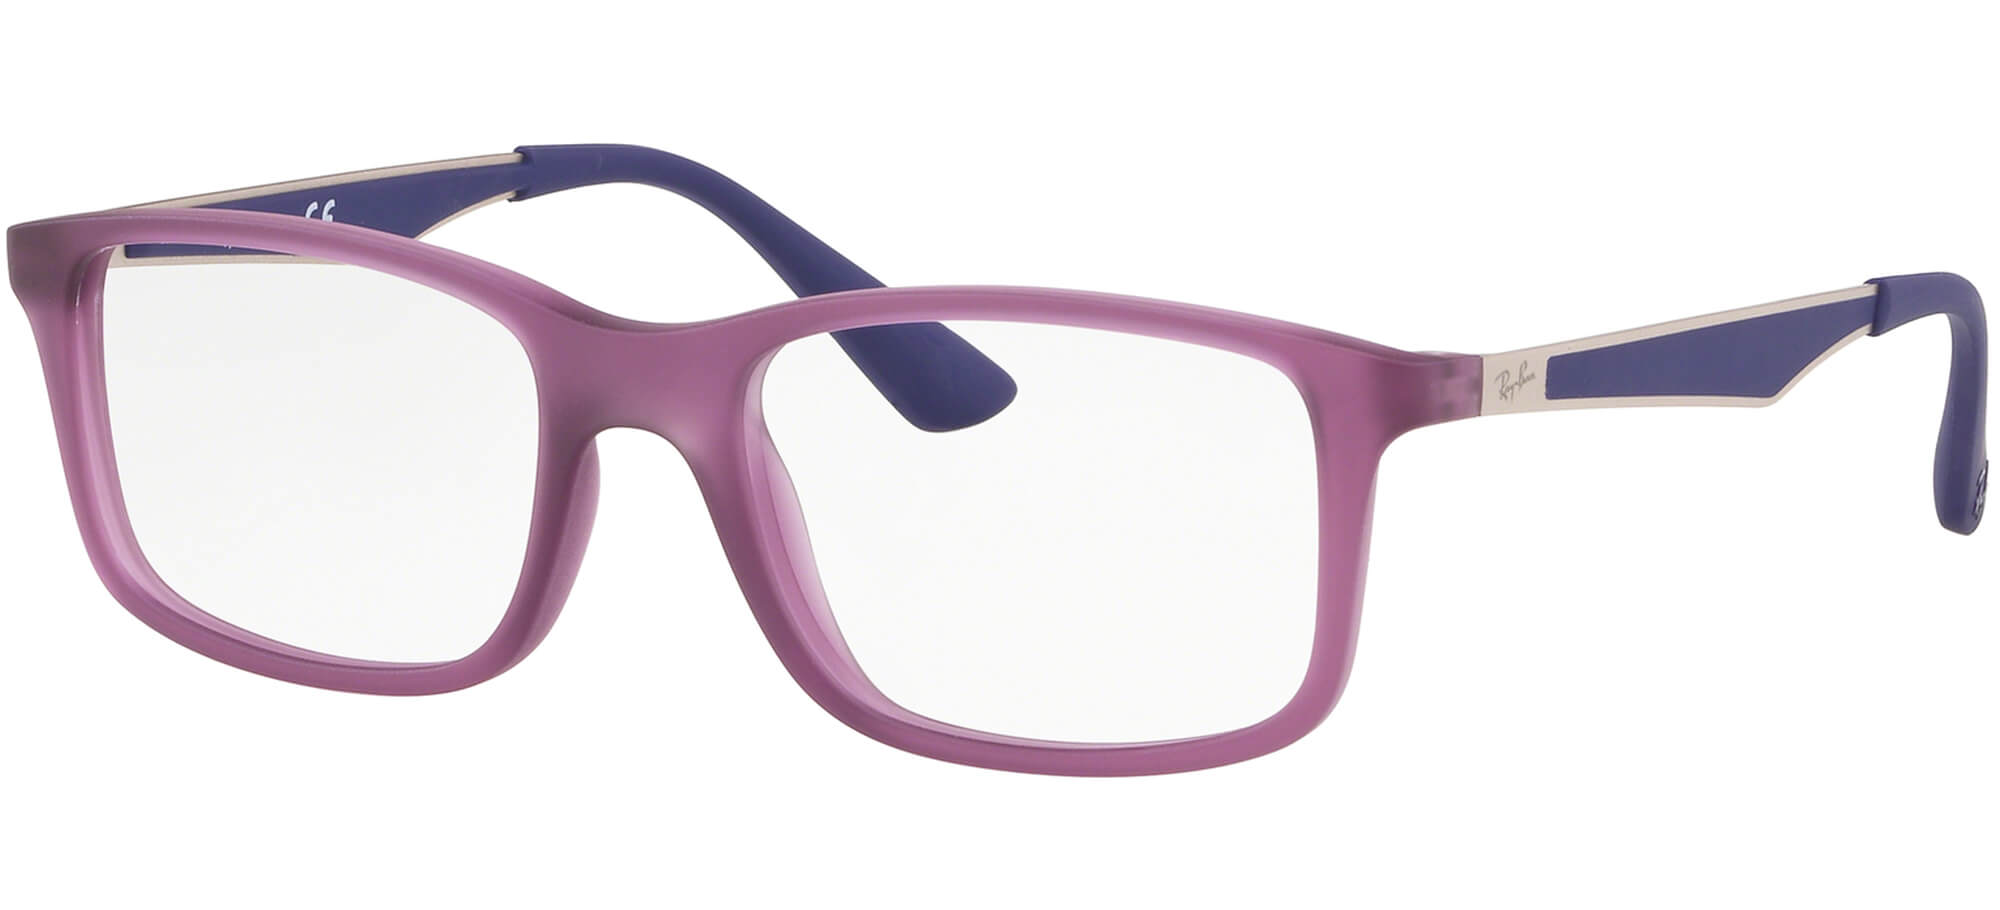 Ray-Ban JuniorRY 1570Violet (3790)